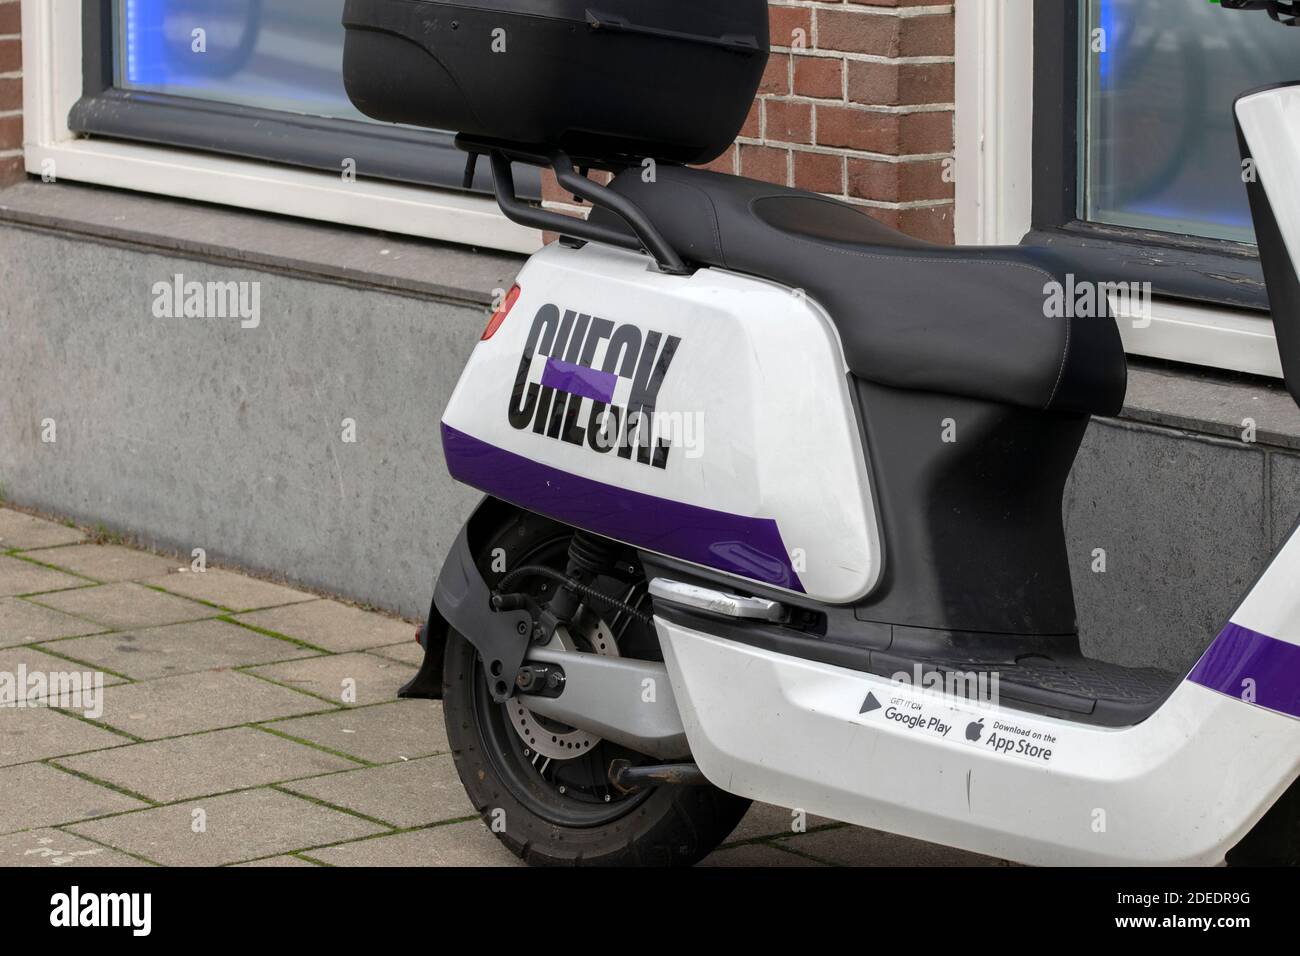 Check Rental Scooter At Amsterdam The Netherlands 27-11-2020 Stock Photo -  Alamy